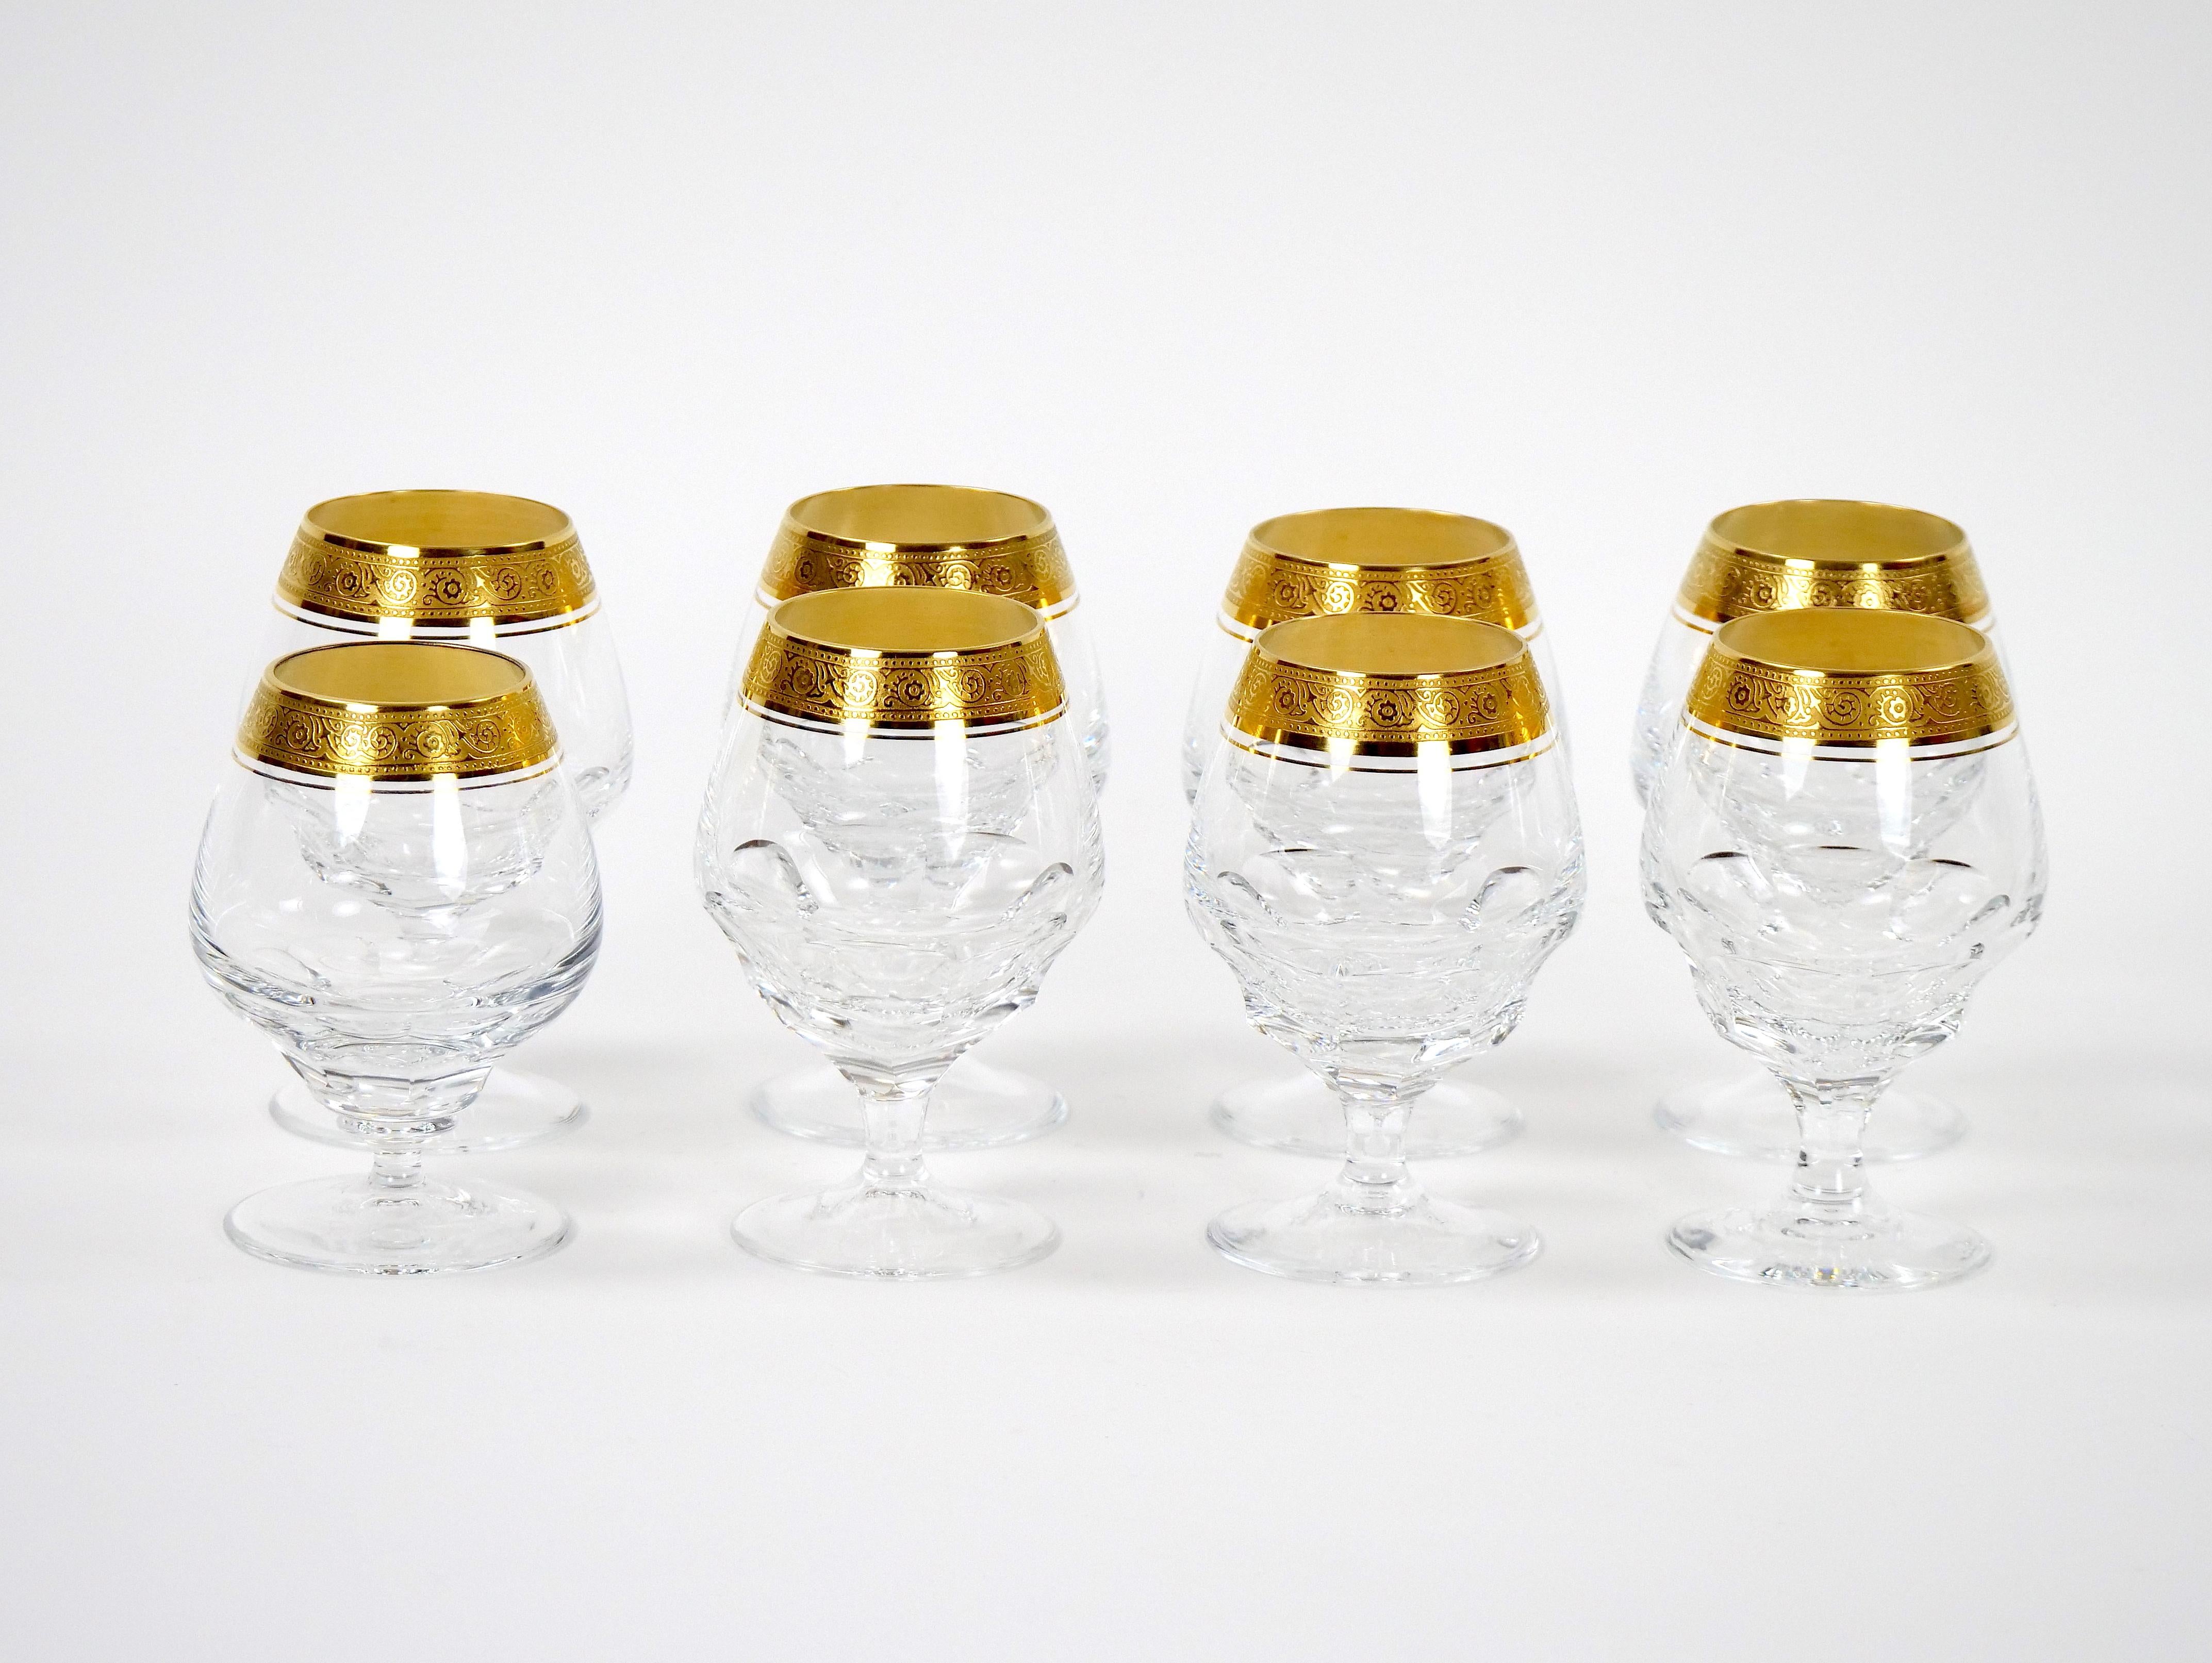 Elevate your dining experience with our exquisite cut crystal snifter set, meticulously designed with double trimmings of gleaming gilt gold. This opulent service for eight people brings sophistication to any occasion, combining intricate